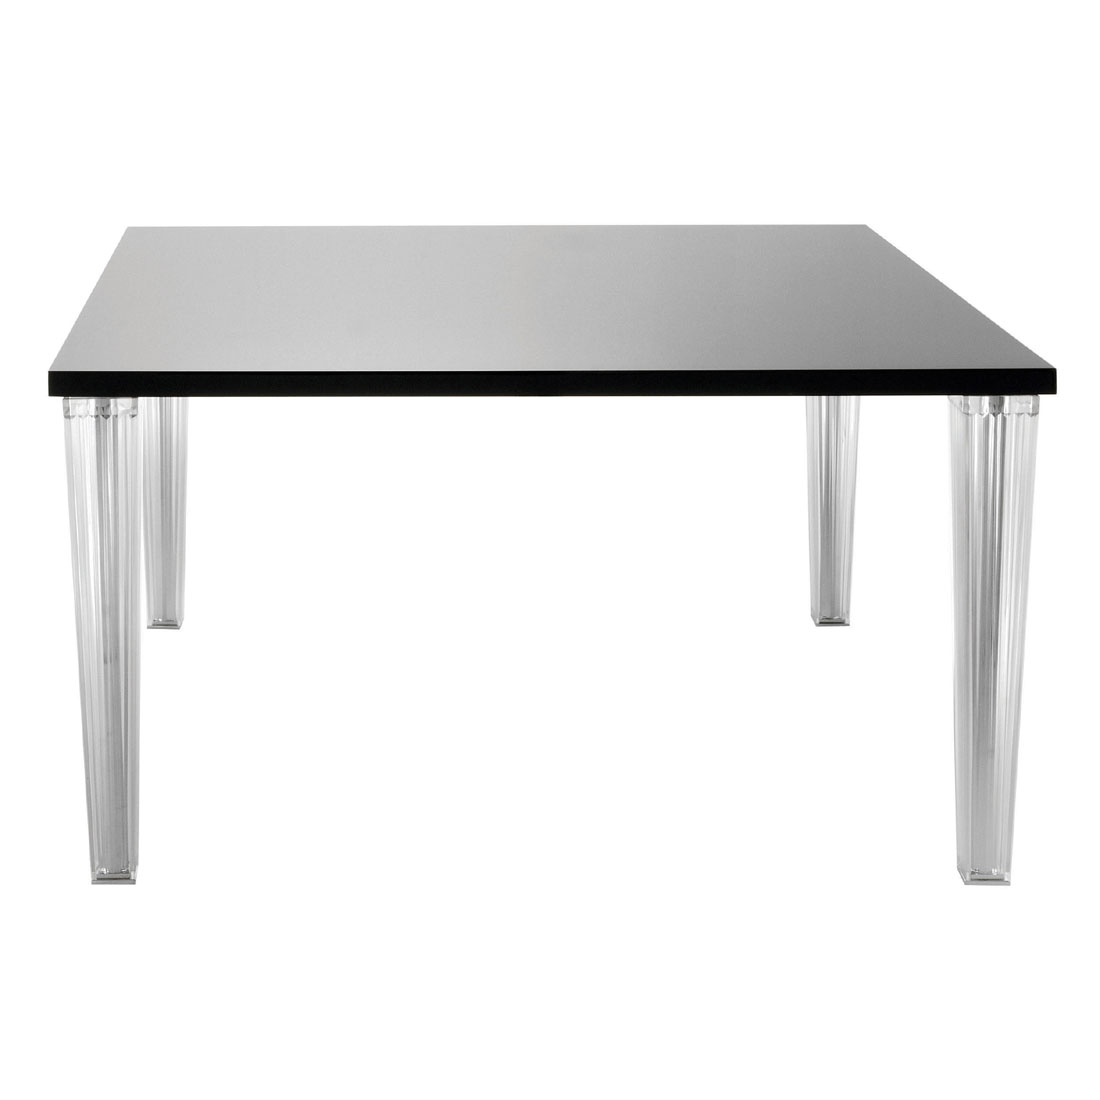 Kartell Top Dining Table, Rectangular Square Marble Dining Table